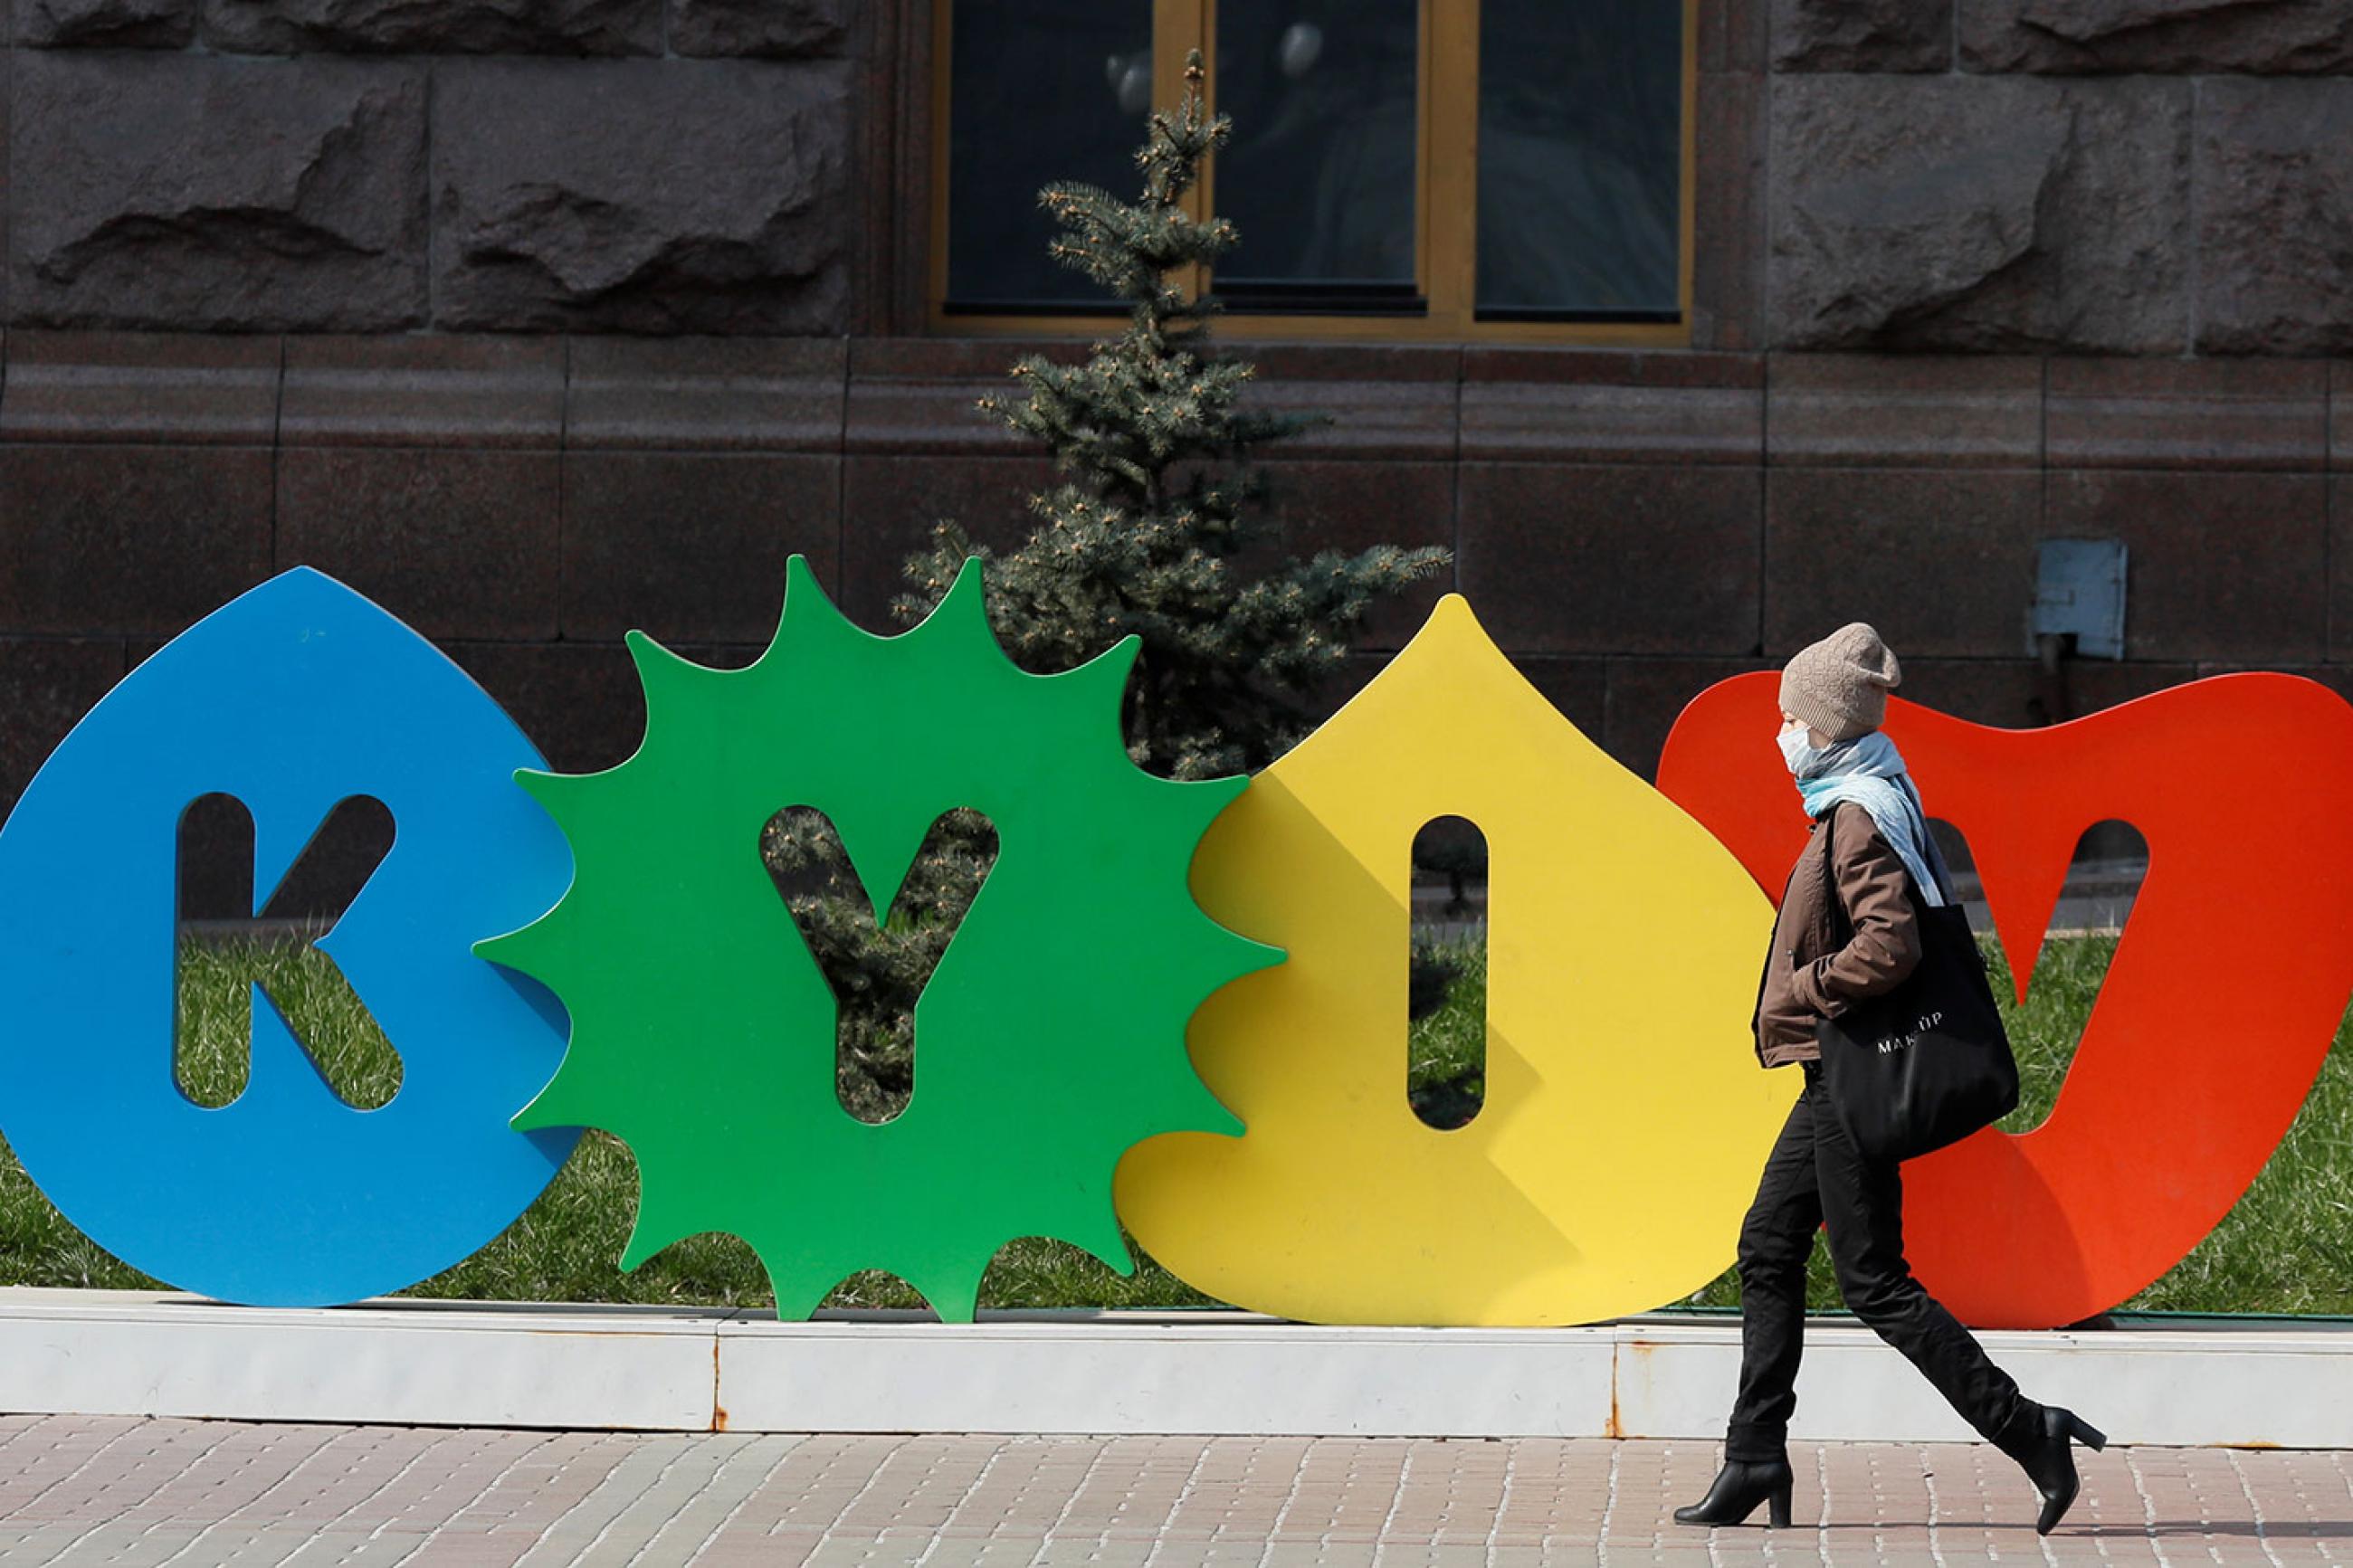 A woman wearing a mask during the coronavirus pandemic walks along the empty main street Khreshchatyk in central Kyiv, Ukraine on March 30, 2020—a colorful sign behind her bears the name of the city. This is a striking photo with a stylish woman walking in front of a sign with the city's name. REUTERS/Gleb Garanich